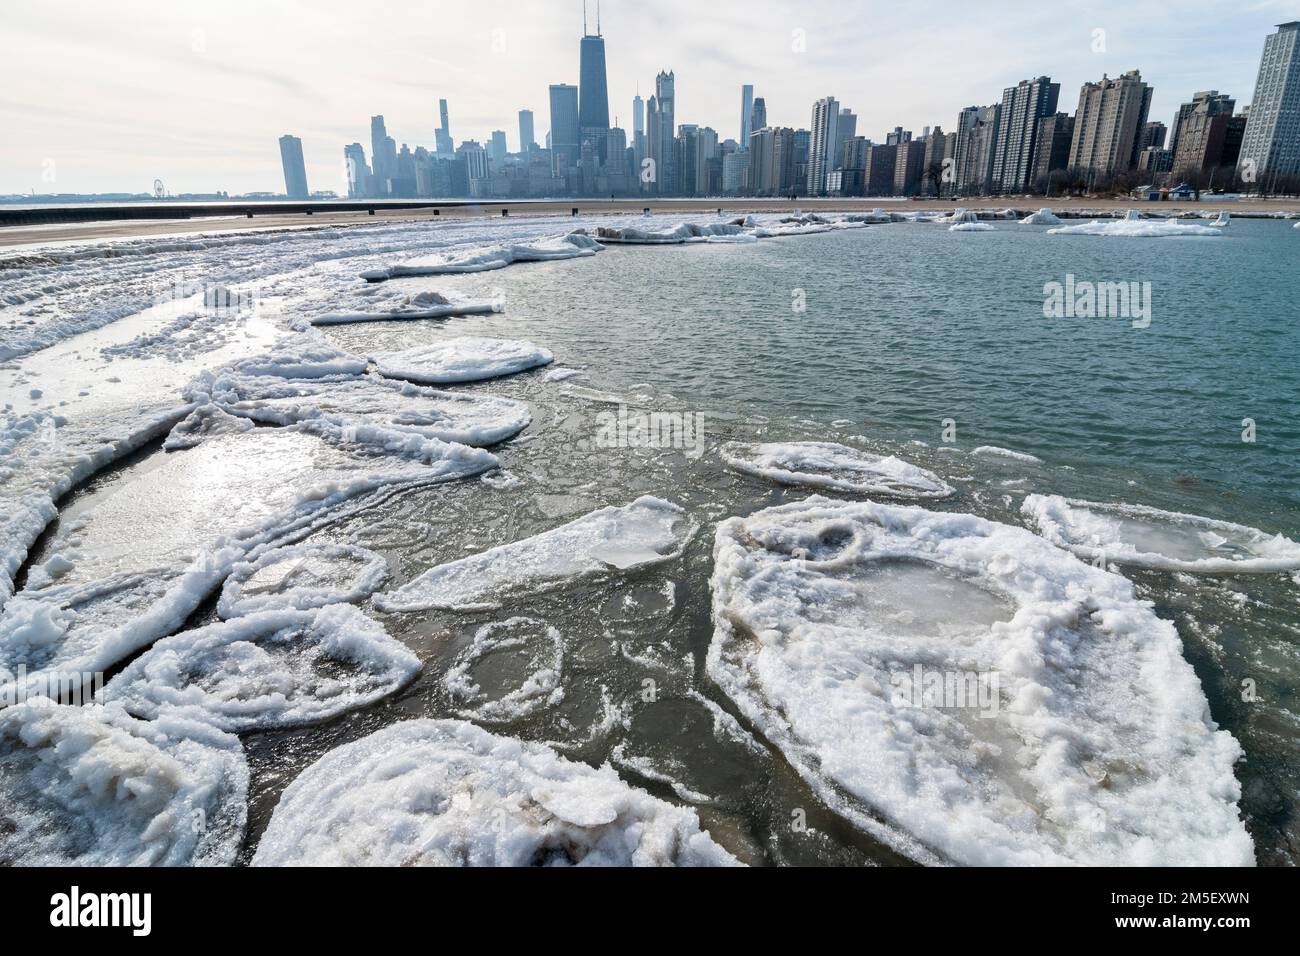 Chicago, USA.  28 December 2022.  Chicago weather - Pancake ice lingers on the shores of Lake Michigan following heavy snow and what was termed a ‘bomb cyclone’ which has affected large parts of the country with freezing temperatures.  The forecast for Chicago is for warmer, above-zero conditions for the next ten days. Credit: Stephen Chung / Alamy Live News Stock Photo